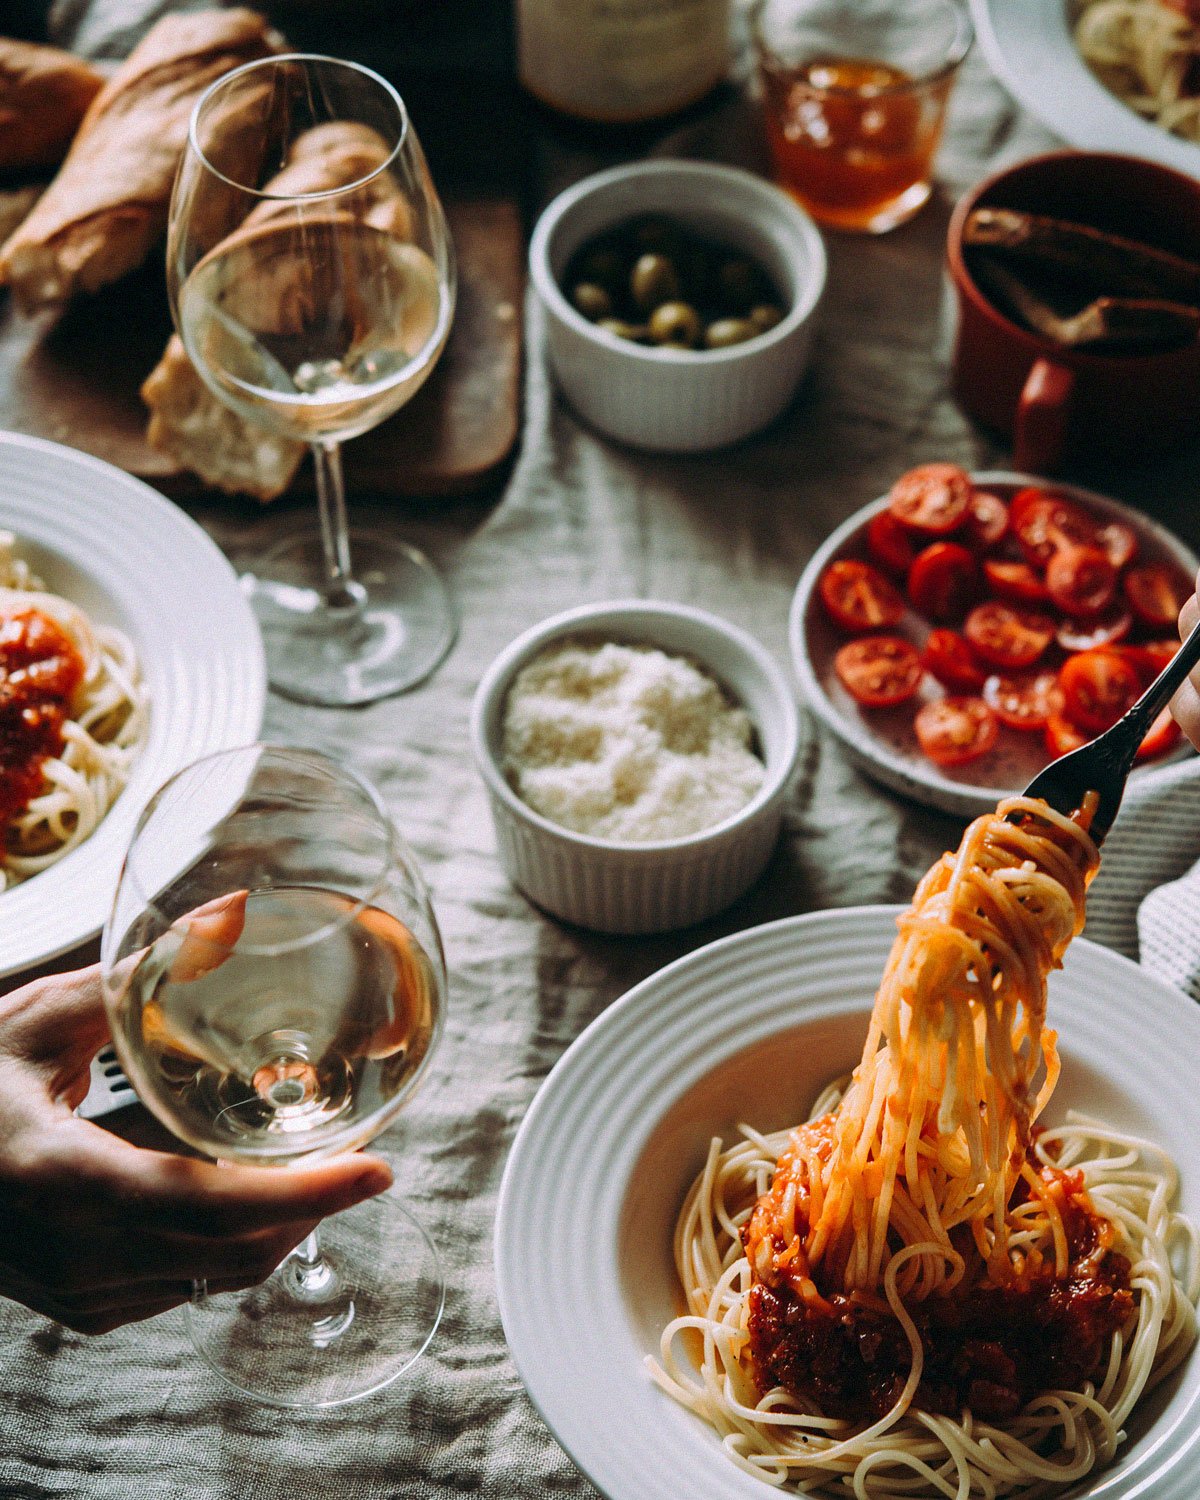 Spaghetti and Meatballs Dinner with Wine on table